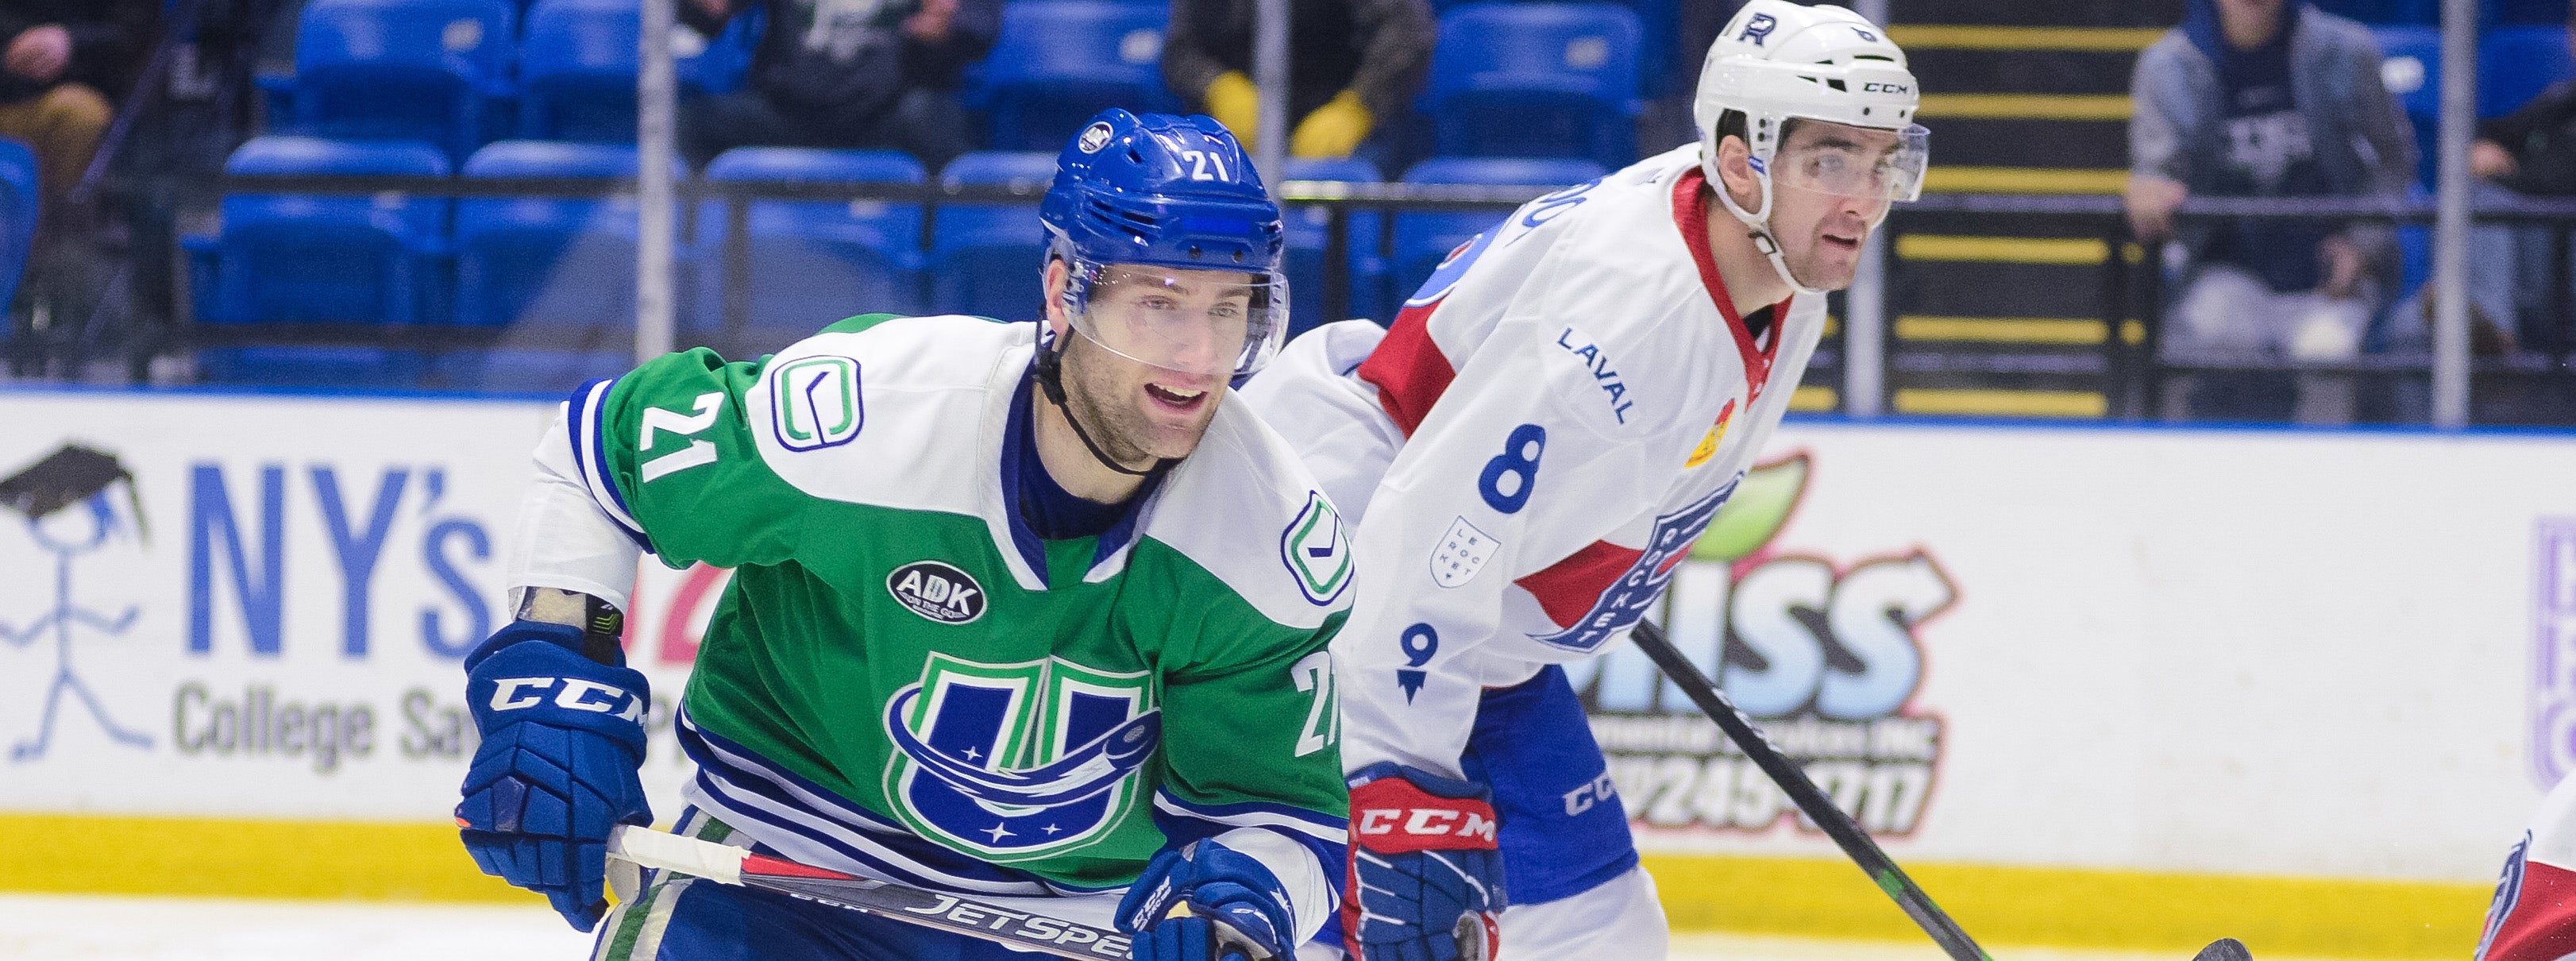 COMETS BATTLE ROCKET IN CRUCIAL DIVISIONAL SHOWDOWN